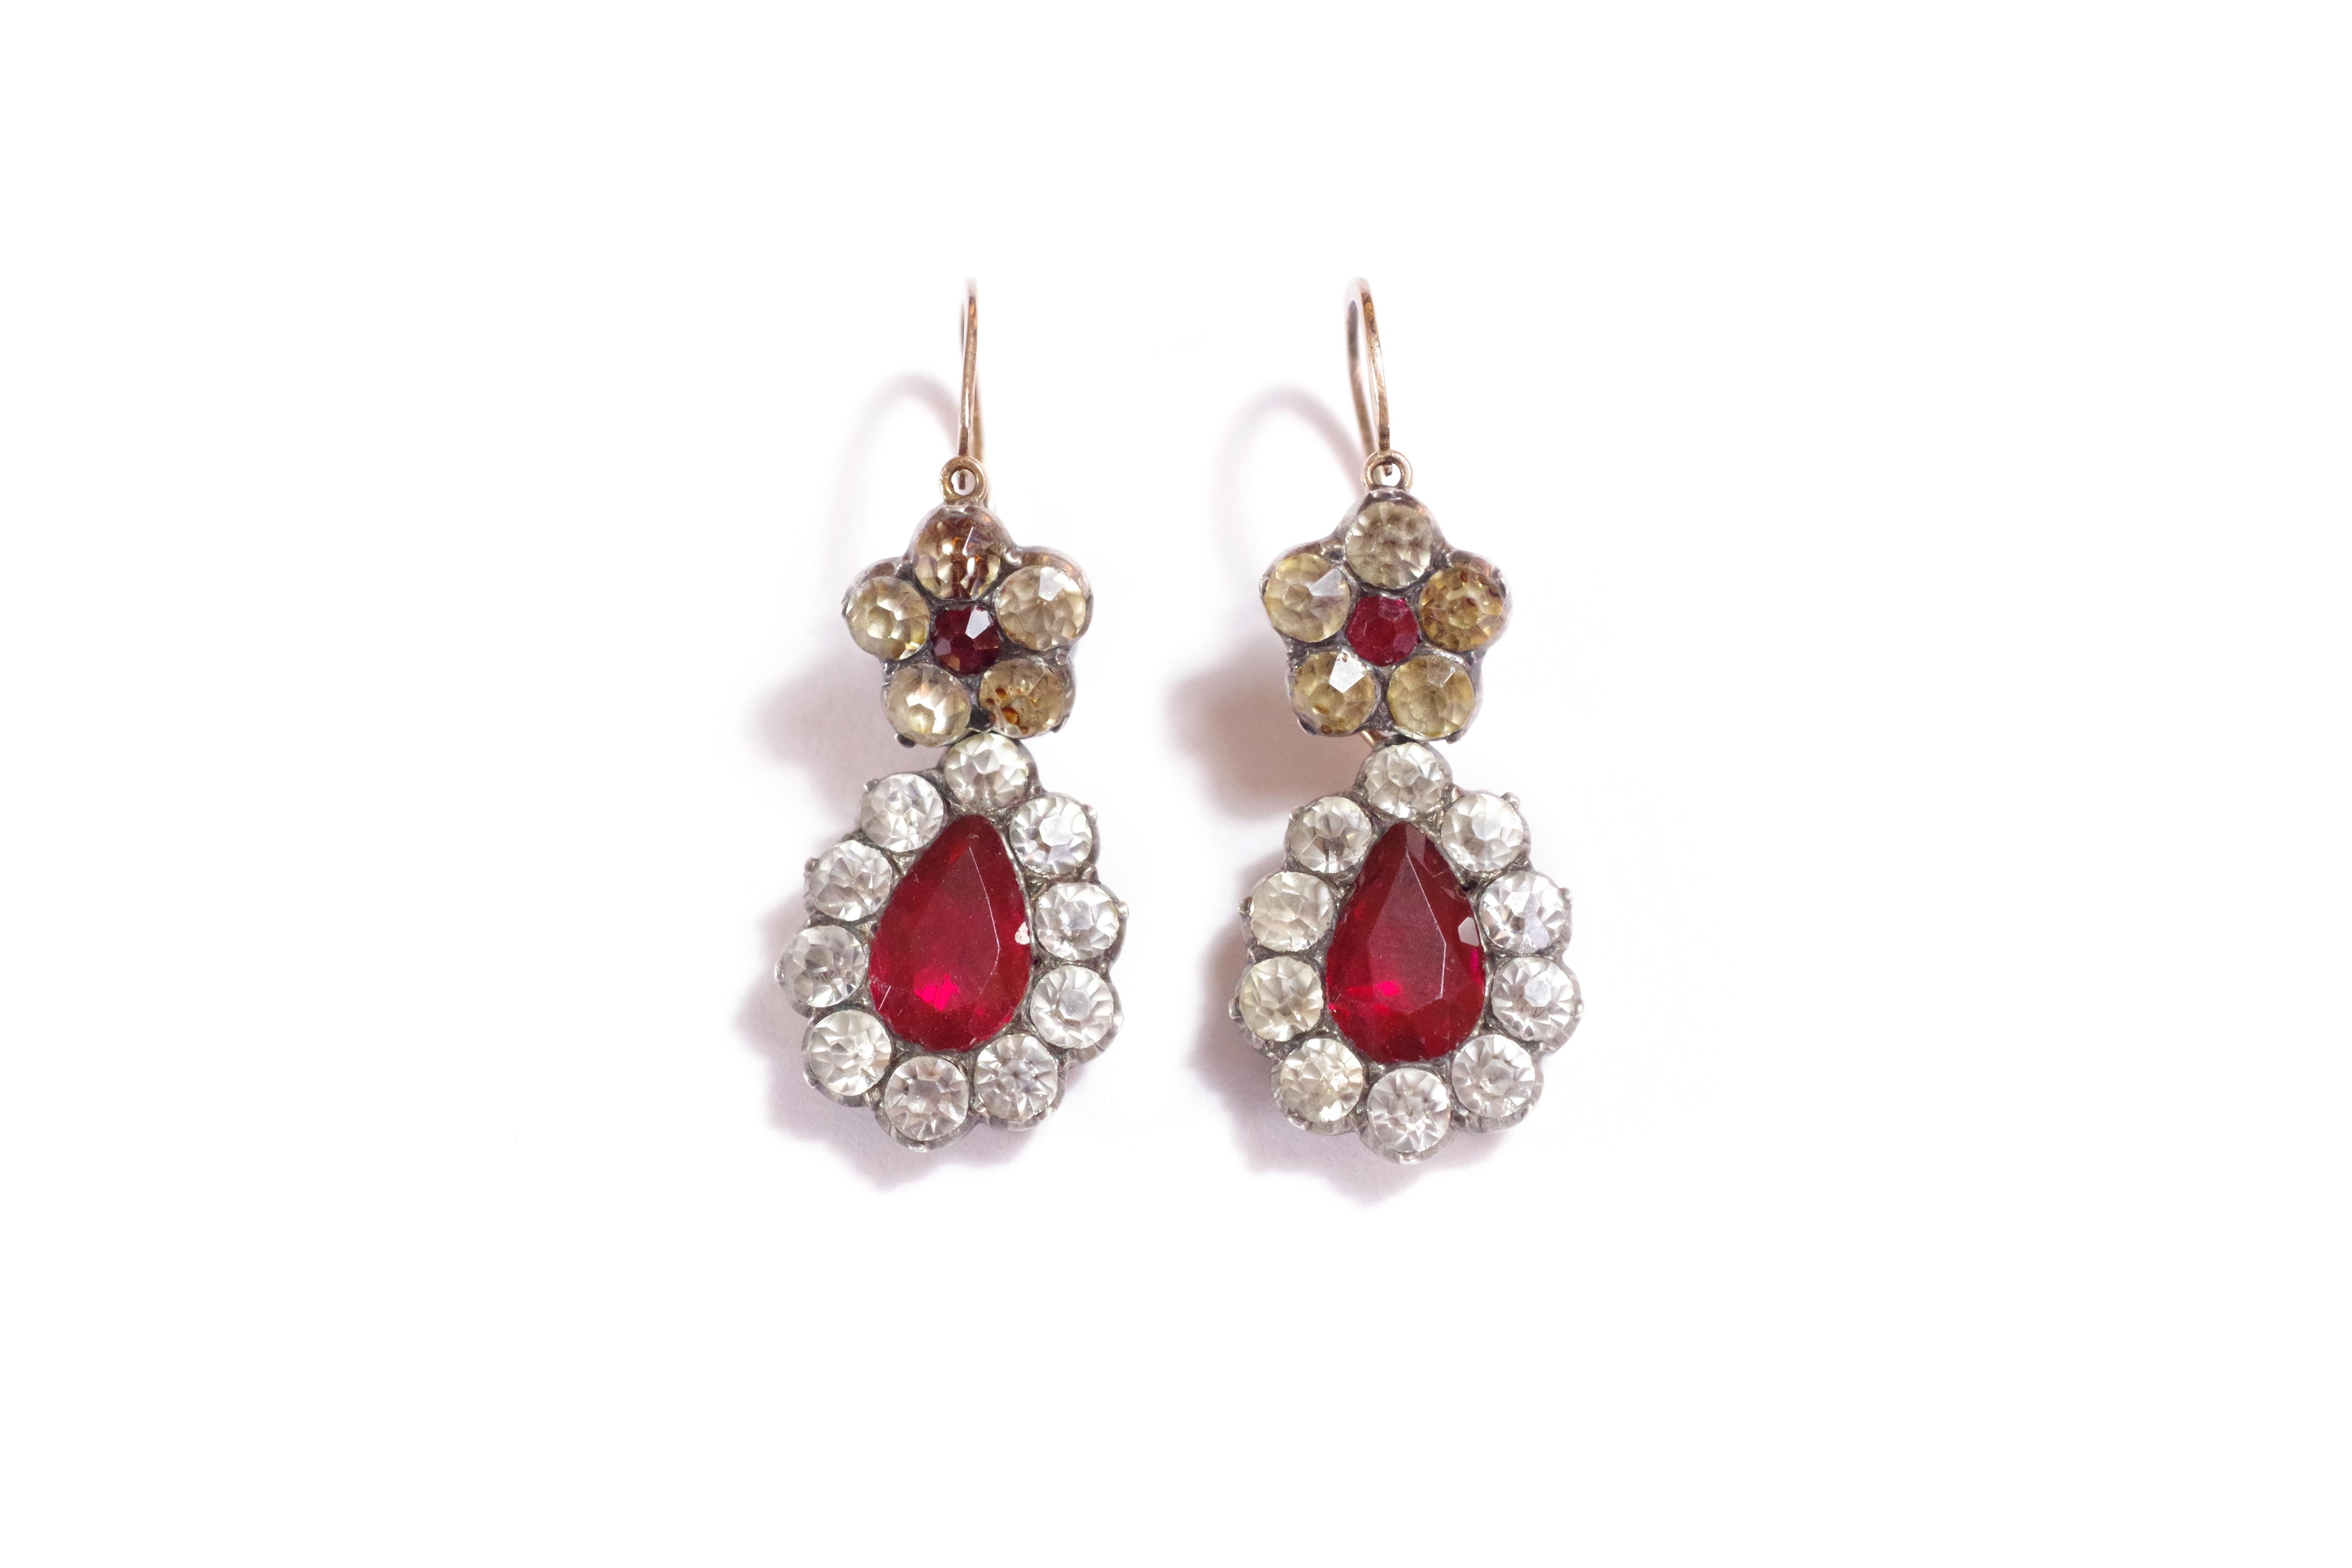 Georgian paste earrings in 18k pink gold and silver. These earrings are in two parts. The upper part is composed of a drop earring with a flower design, decorated with red and white faceted glass set on silver. The lower part is formed of a drop